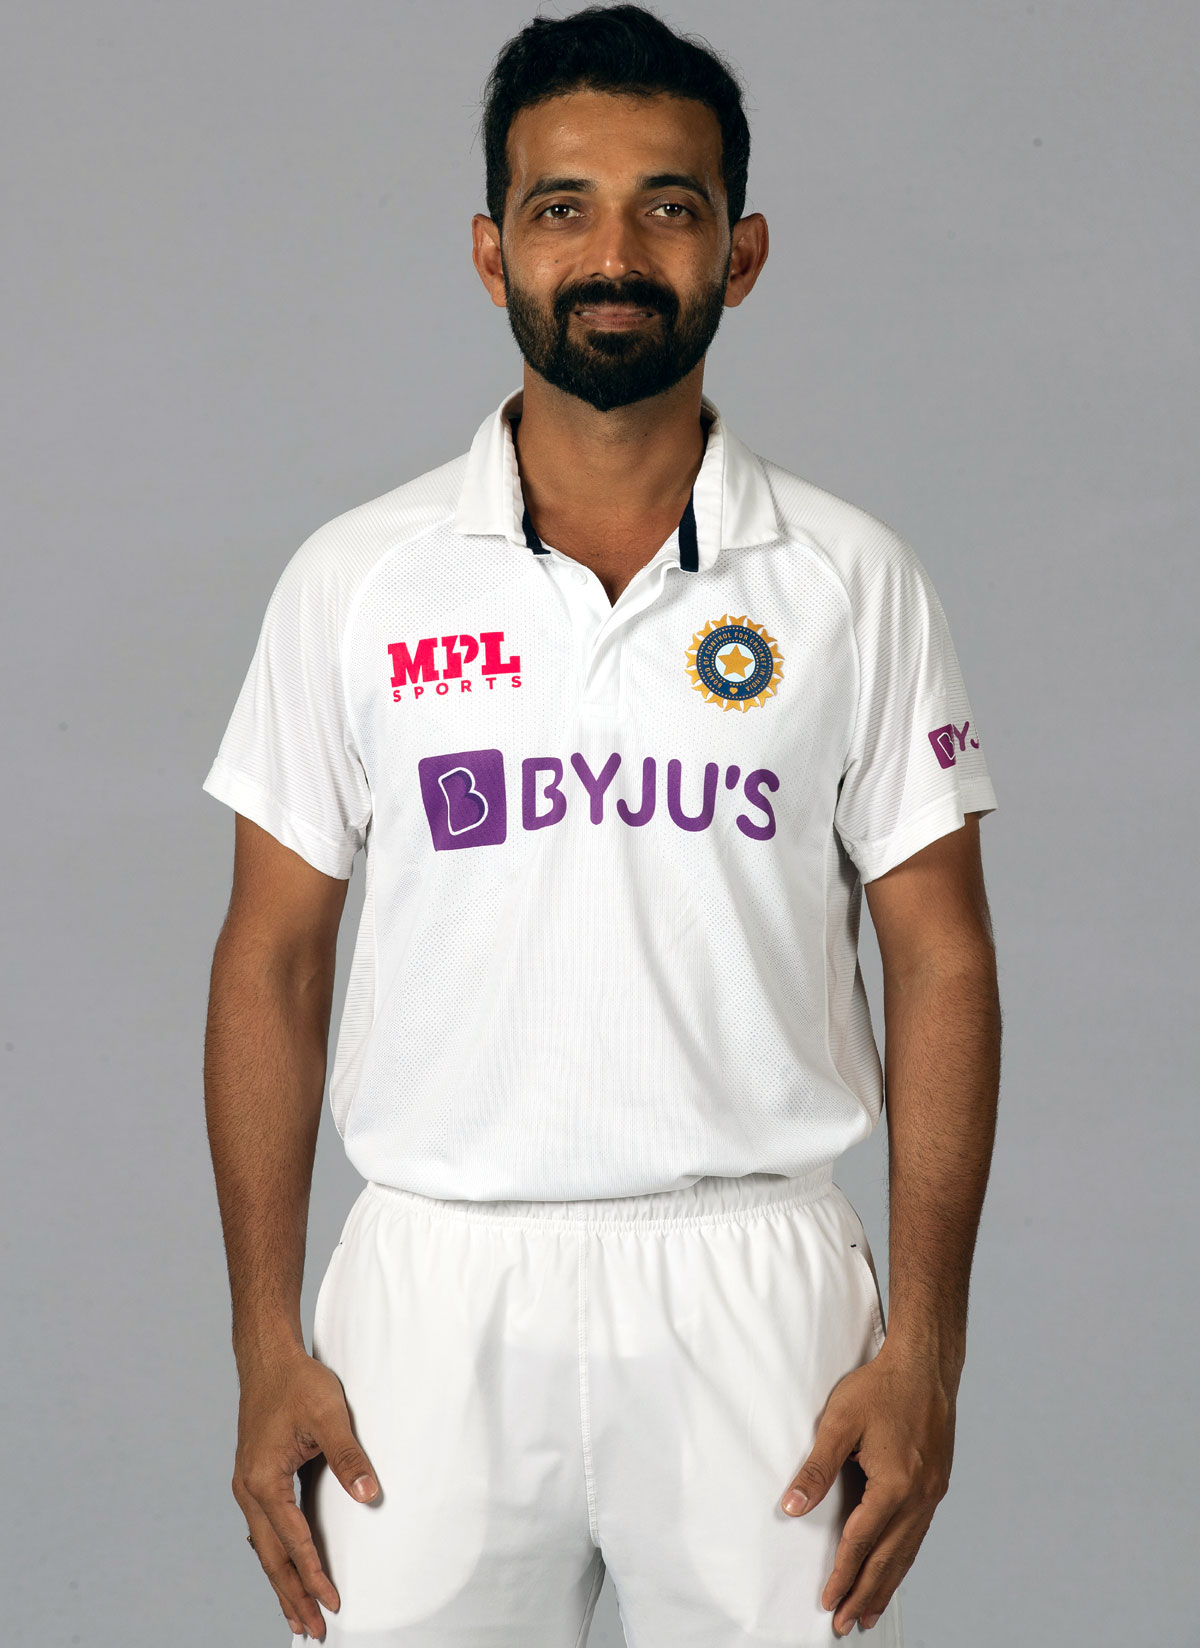 'Rahane, the glue that held team together last time'